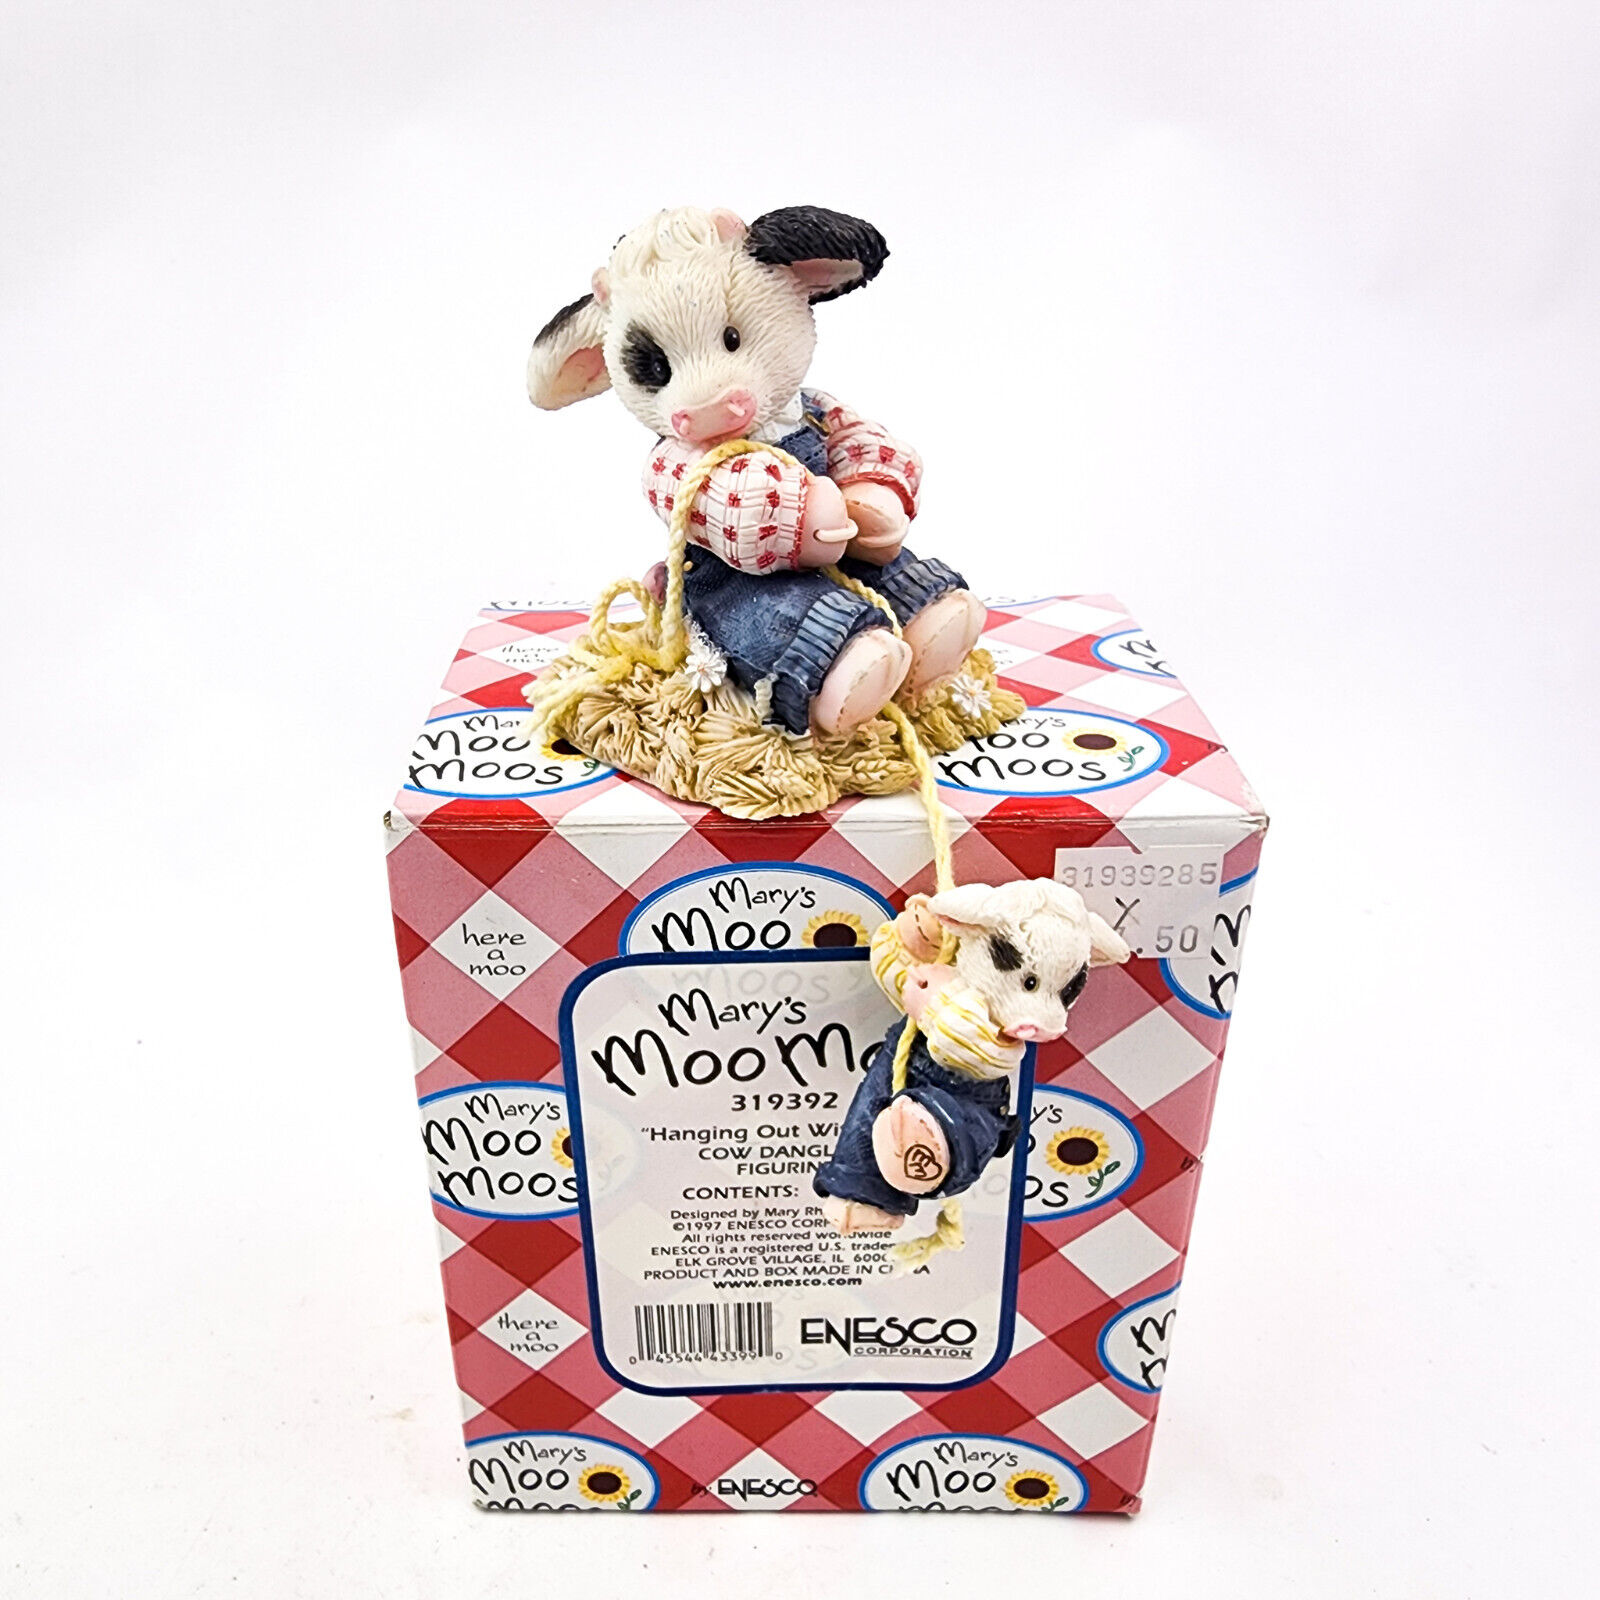 Vintage Enesco Marys Moo Moos Hanging Out with Moo Figurine 1997 with Box